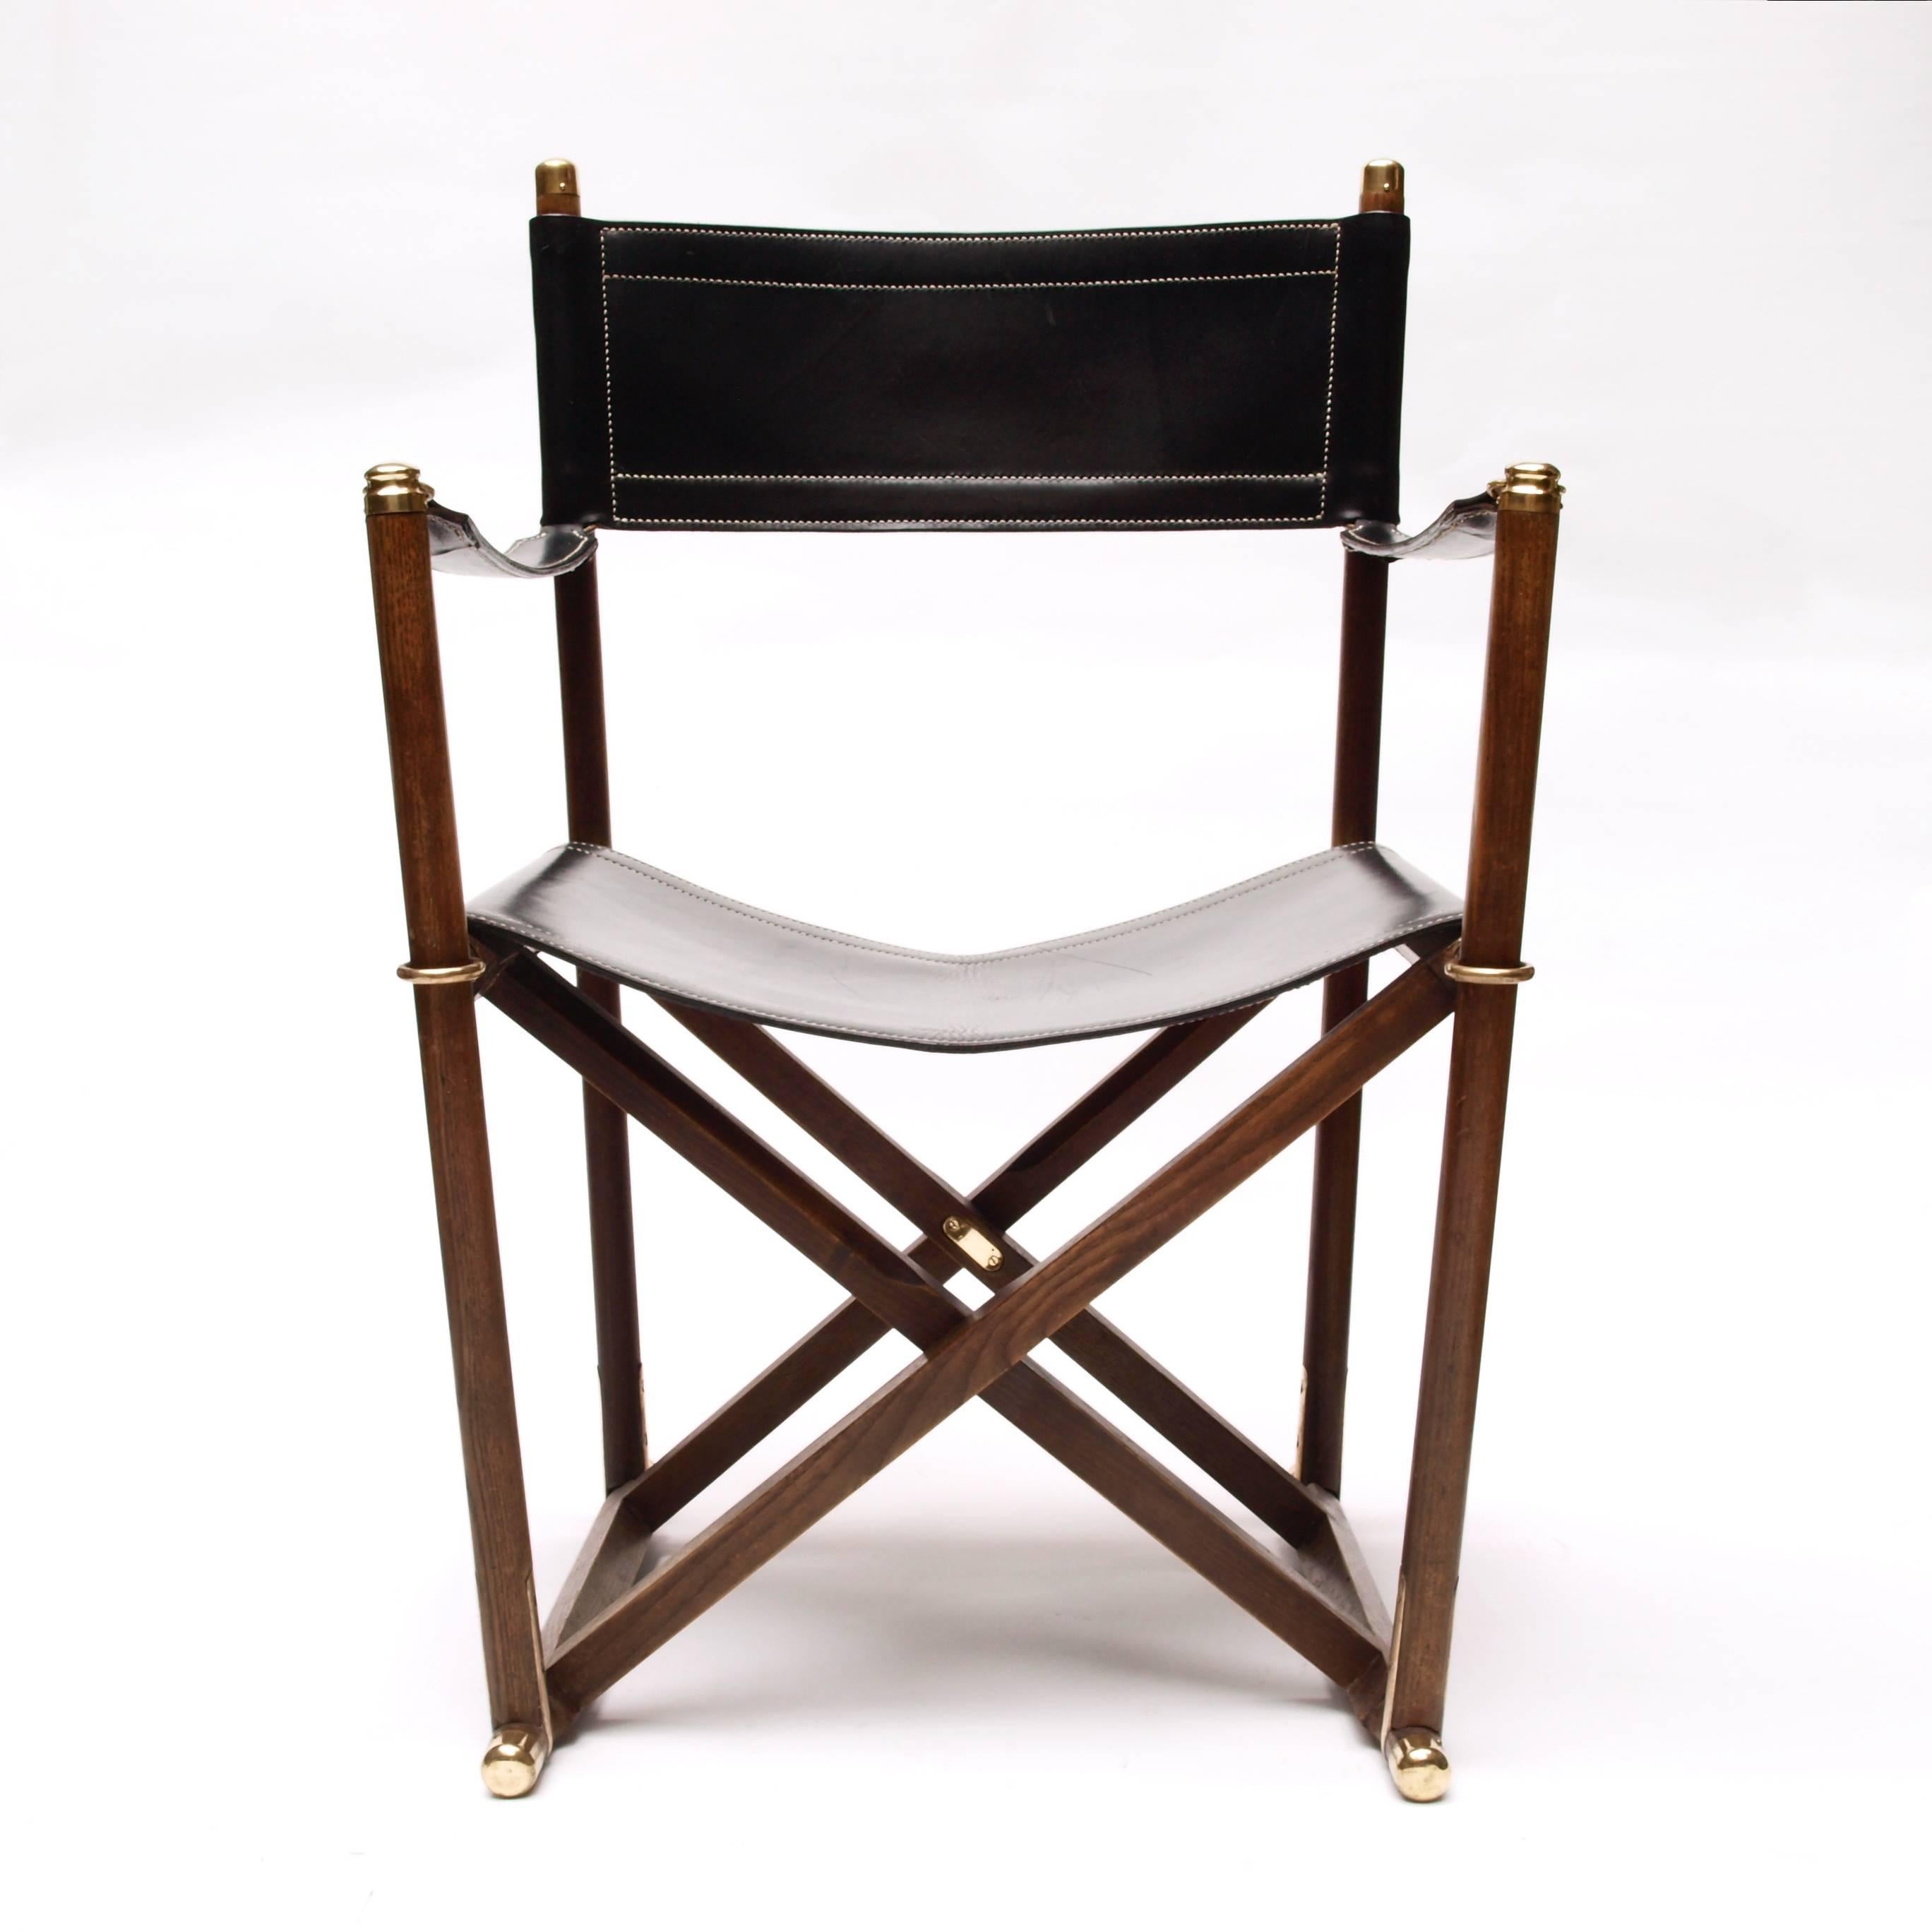 Danish Important Pair of Mogens Koch MK-16 Folding Campaign Chairs